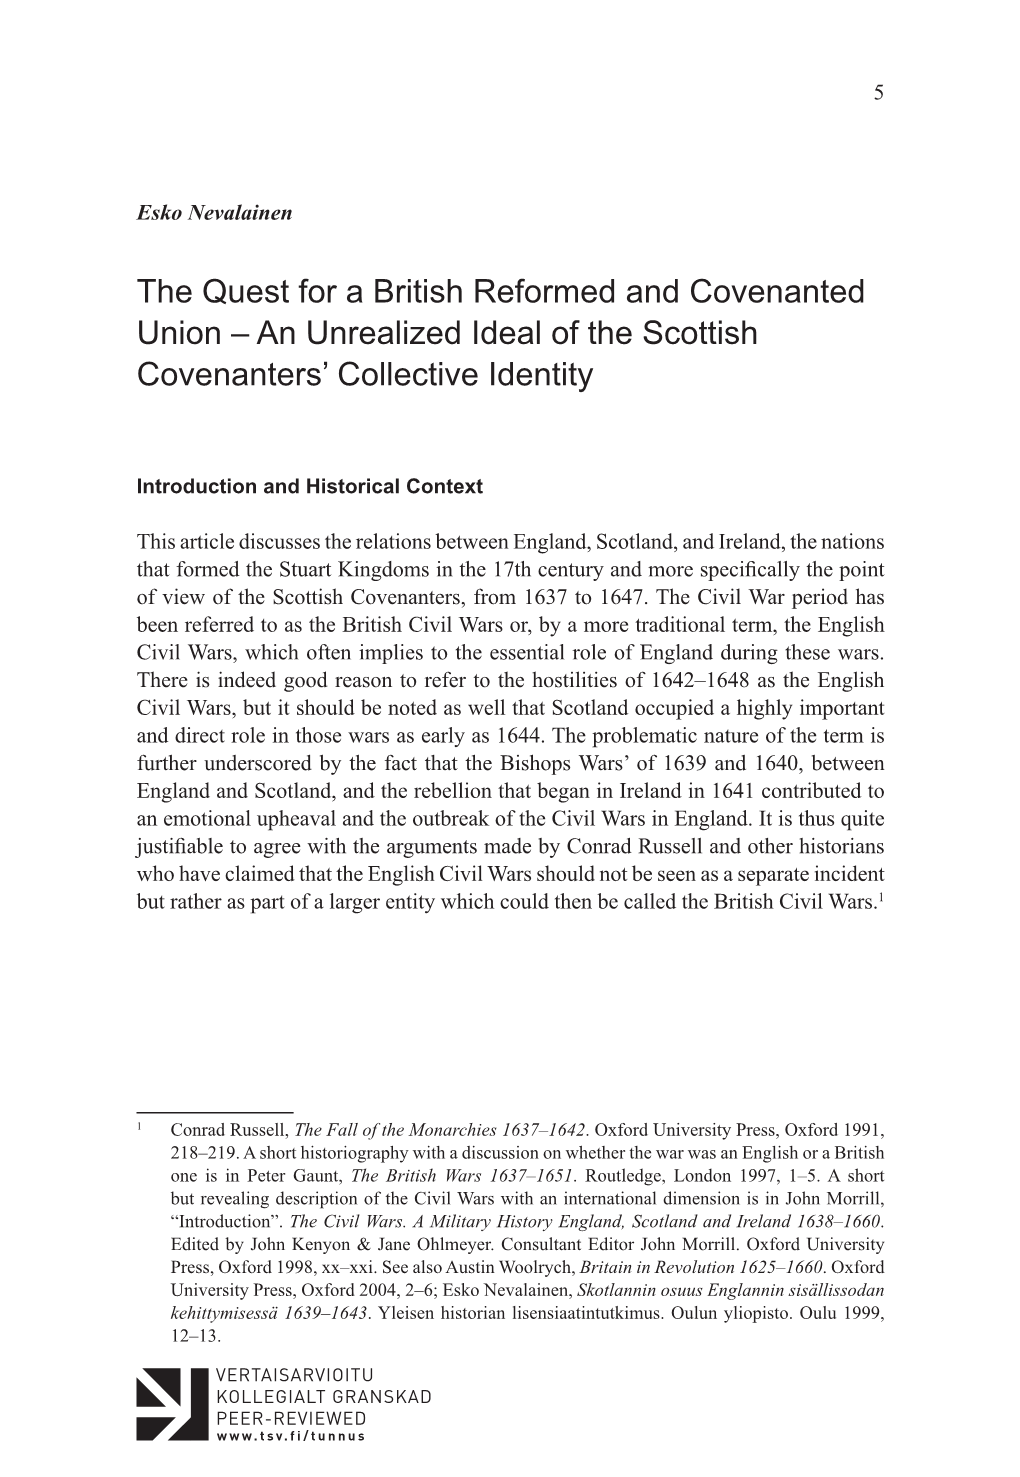 An Unrealized Ideal of the Scottish Covenanters' Collective